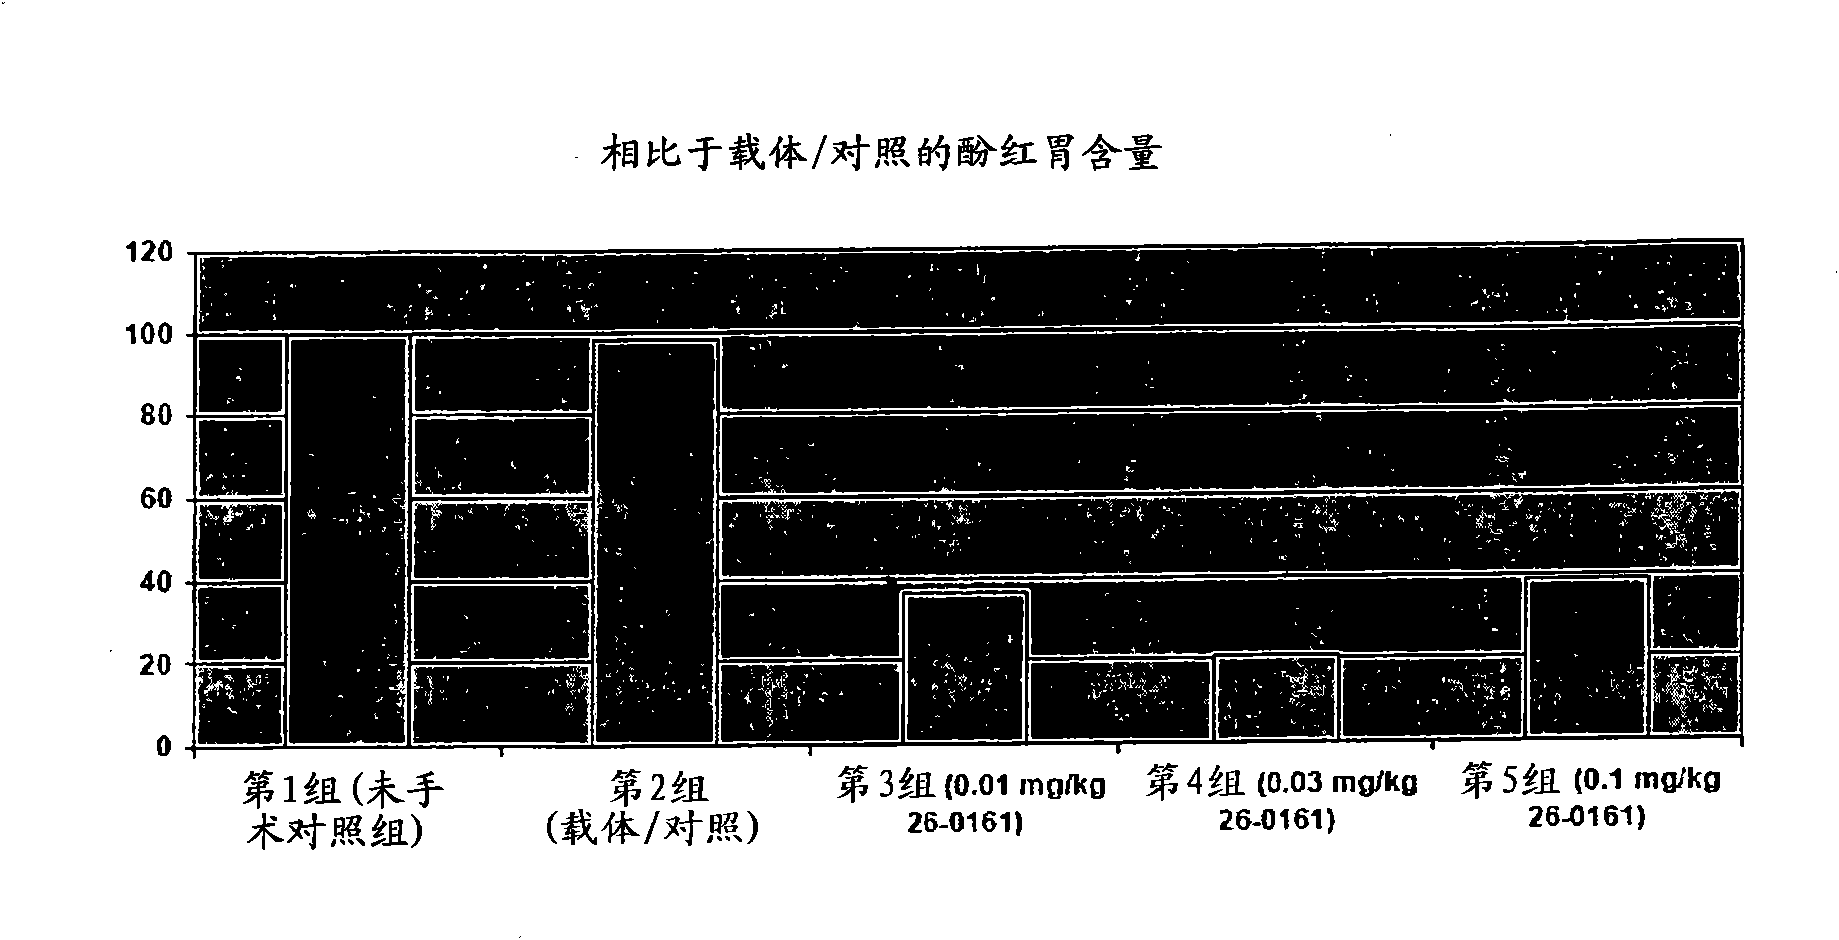 Method of stimulating the motility of the gastrointestinal system using ipamorelin